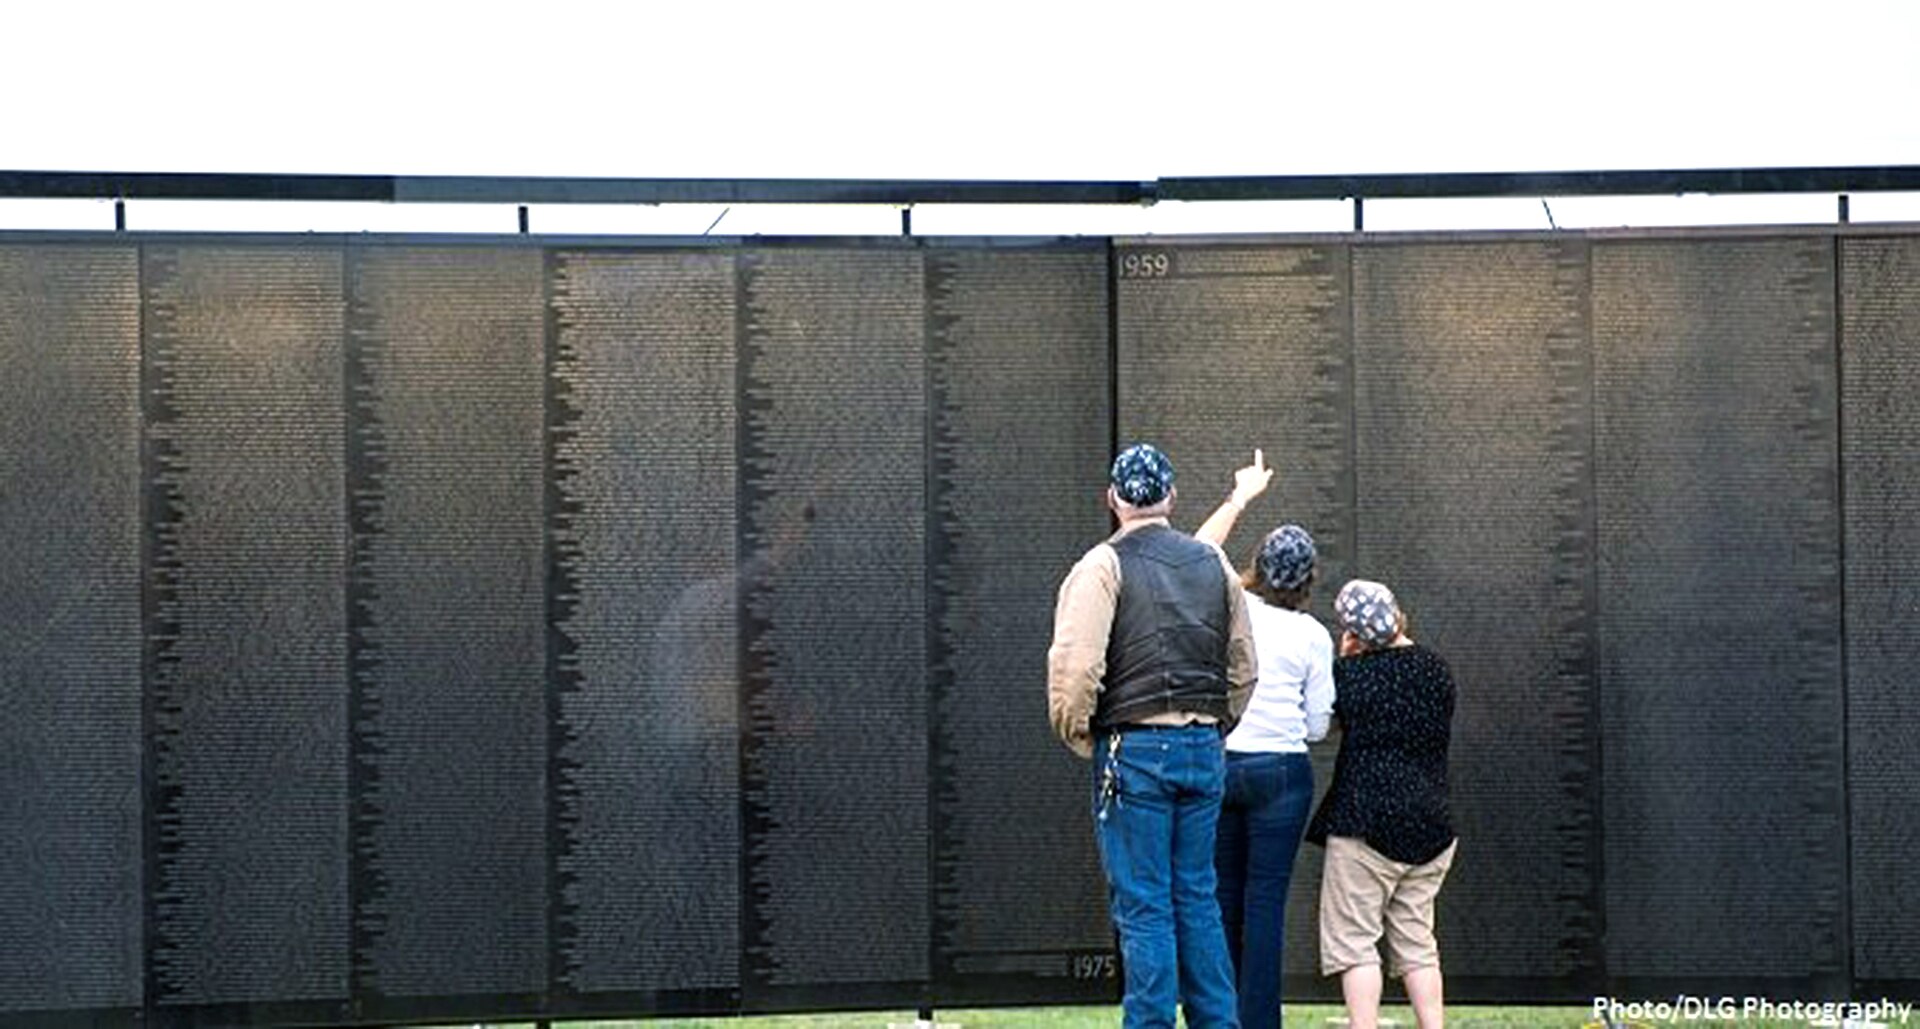 The Daughters of the American Revolution’s Alamo Chapter hosts “The Wall That Heals,” a traveling representation of the Vietnam Veterans Memorial, at the Fort Sam Houston National Cemetery Feb. 28 through March 3. The cemetery is located at 1520 Harry Wurzbach Road, near the Wurzbach Entry Control Point at Joint Base San Antonio-Fort Sam Houston. The replica is 375 feet in length and stands 7.5 feet high at its tallest point. Visitors experience it rising above them as they walk towards the apex, a key feature of the design of the original wall in Washington, D.C.